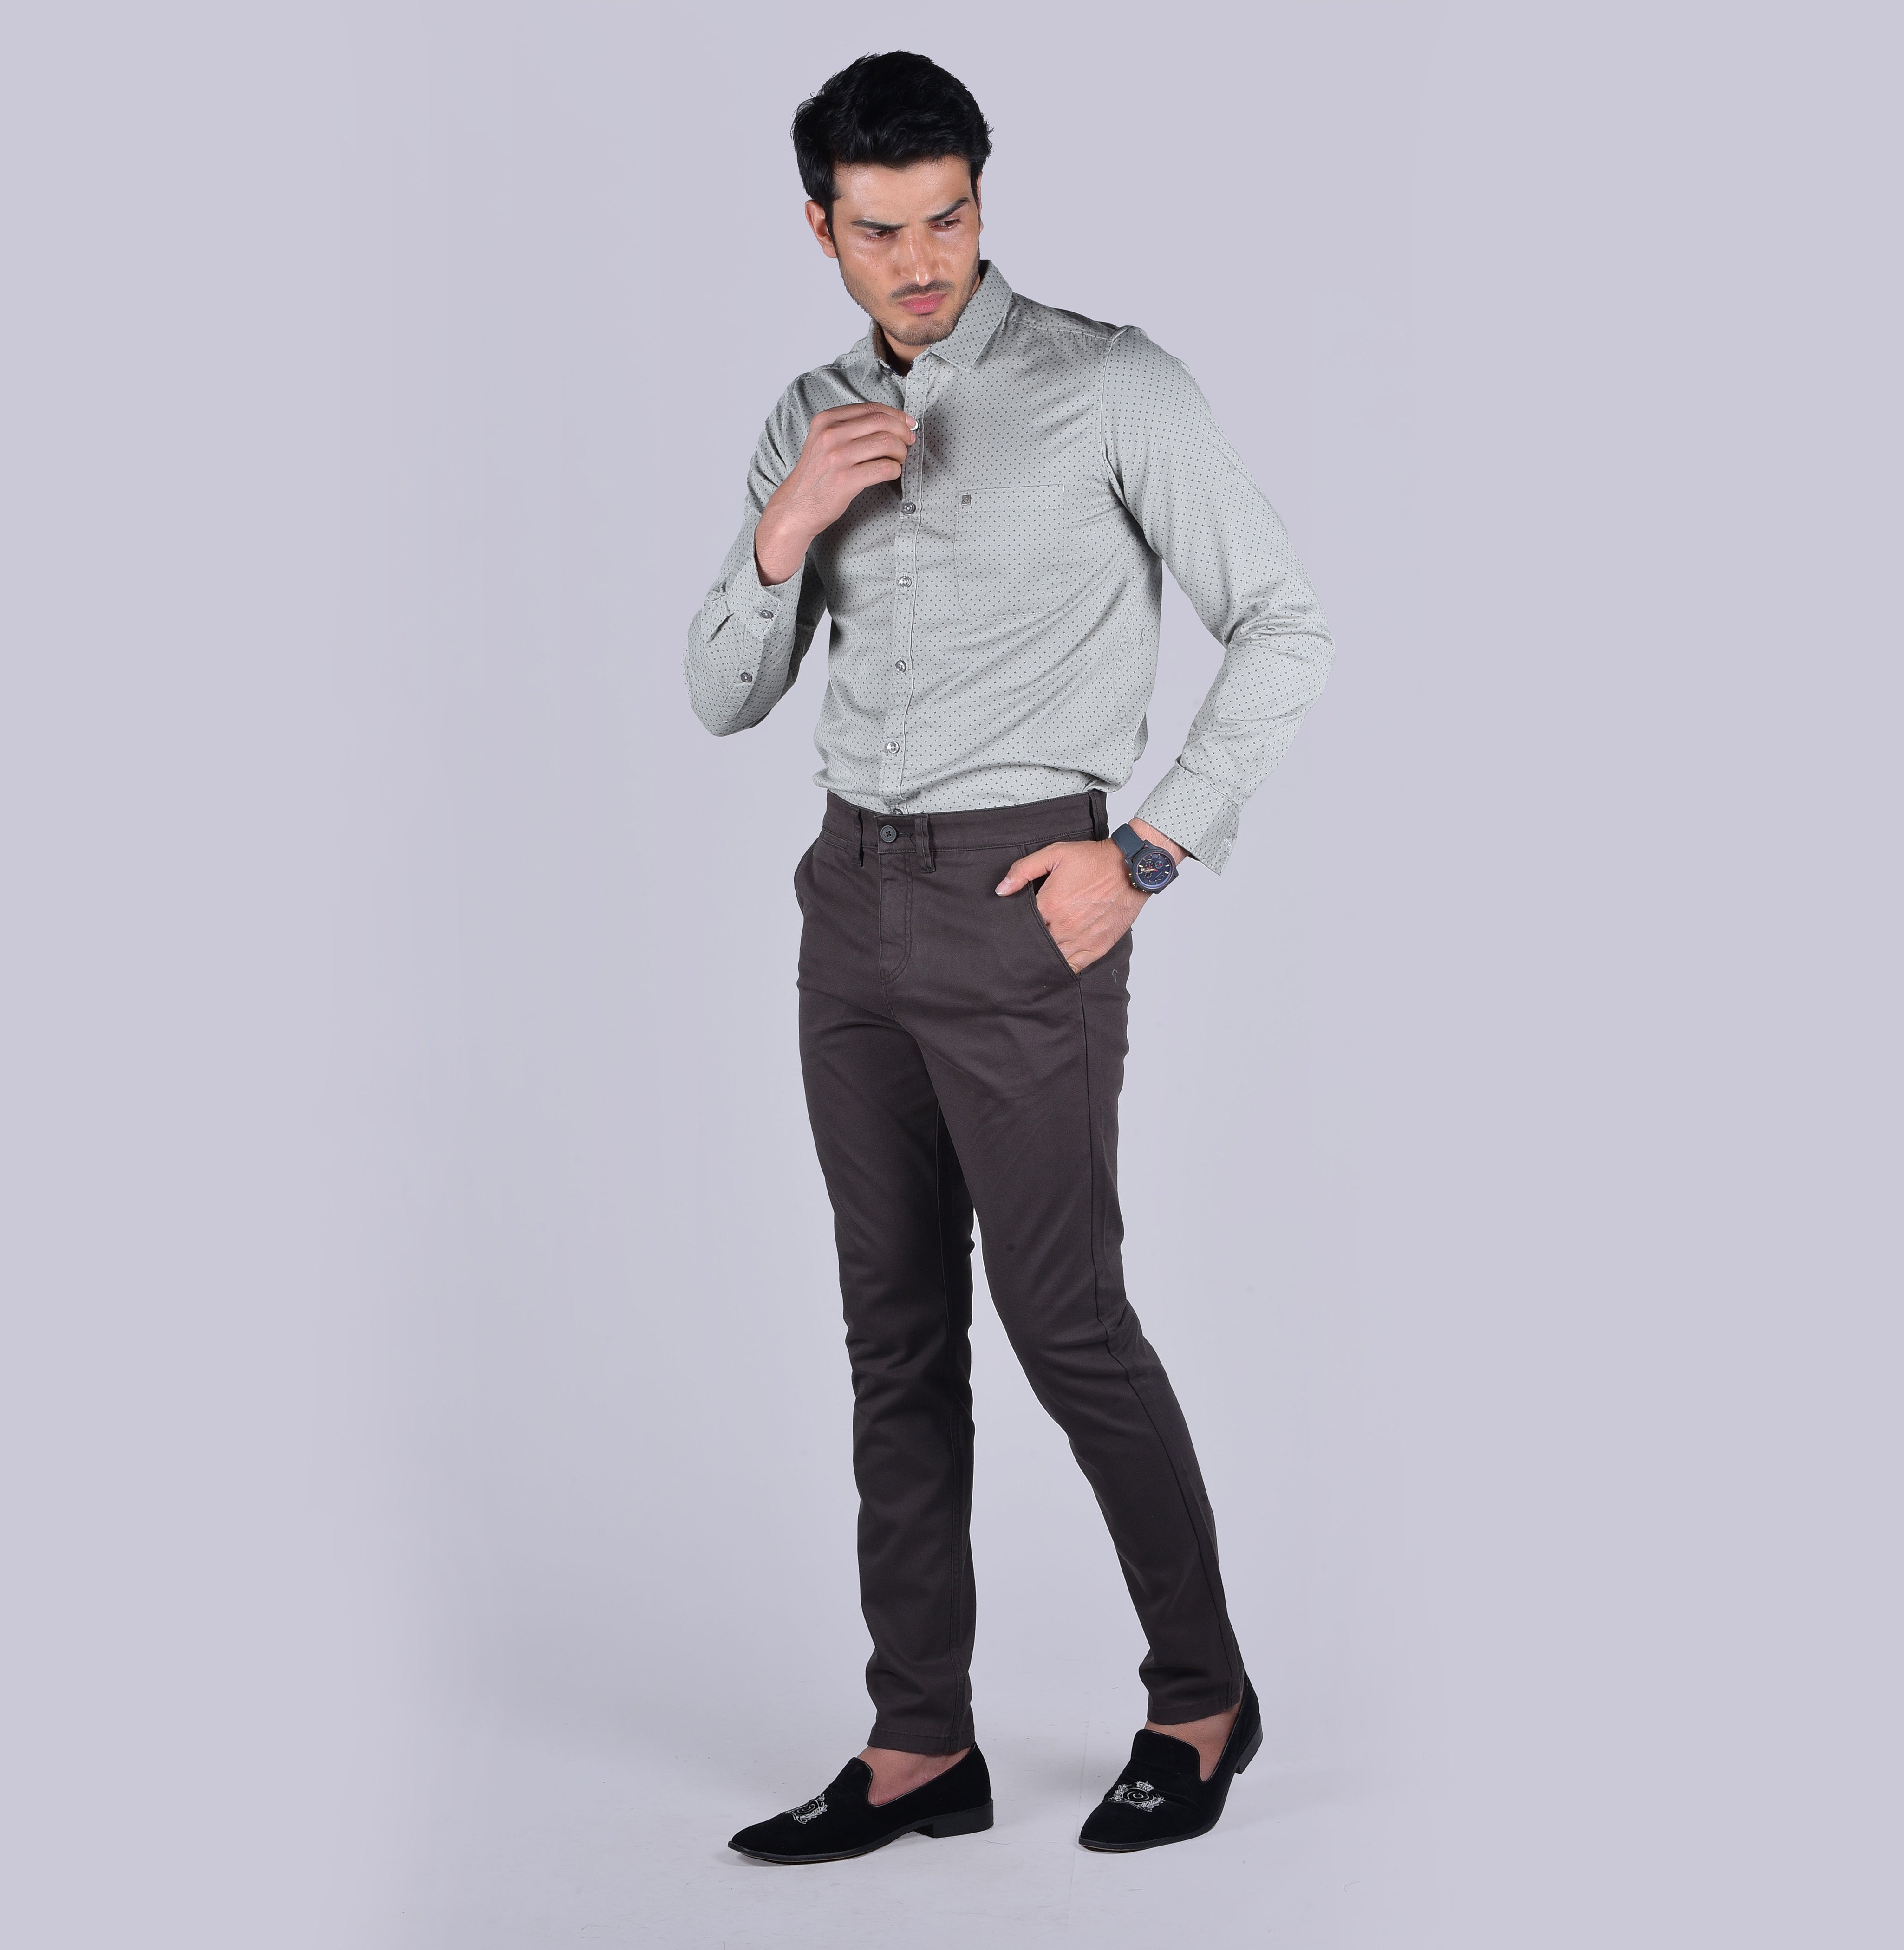 grey shirt and black pant Combo | cash on delivery available | Fashion  Trends hub - YouTube